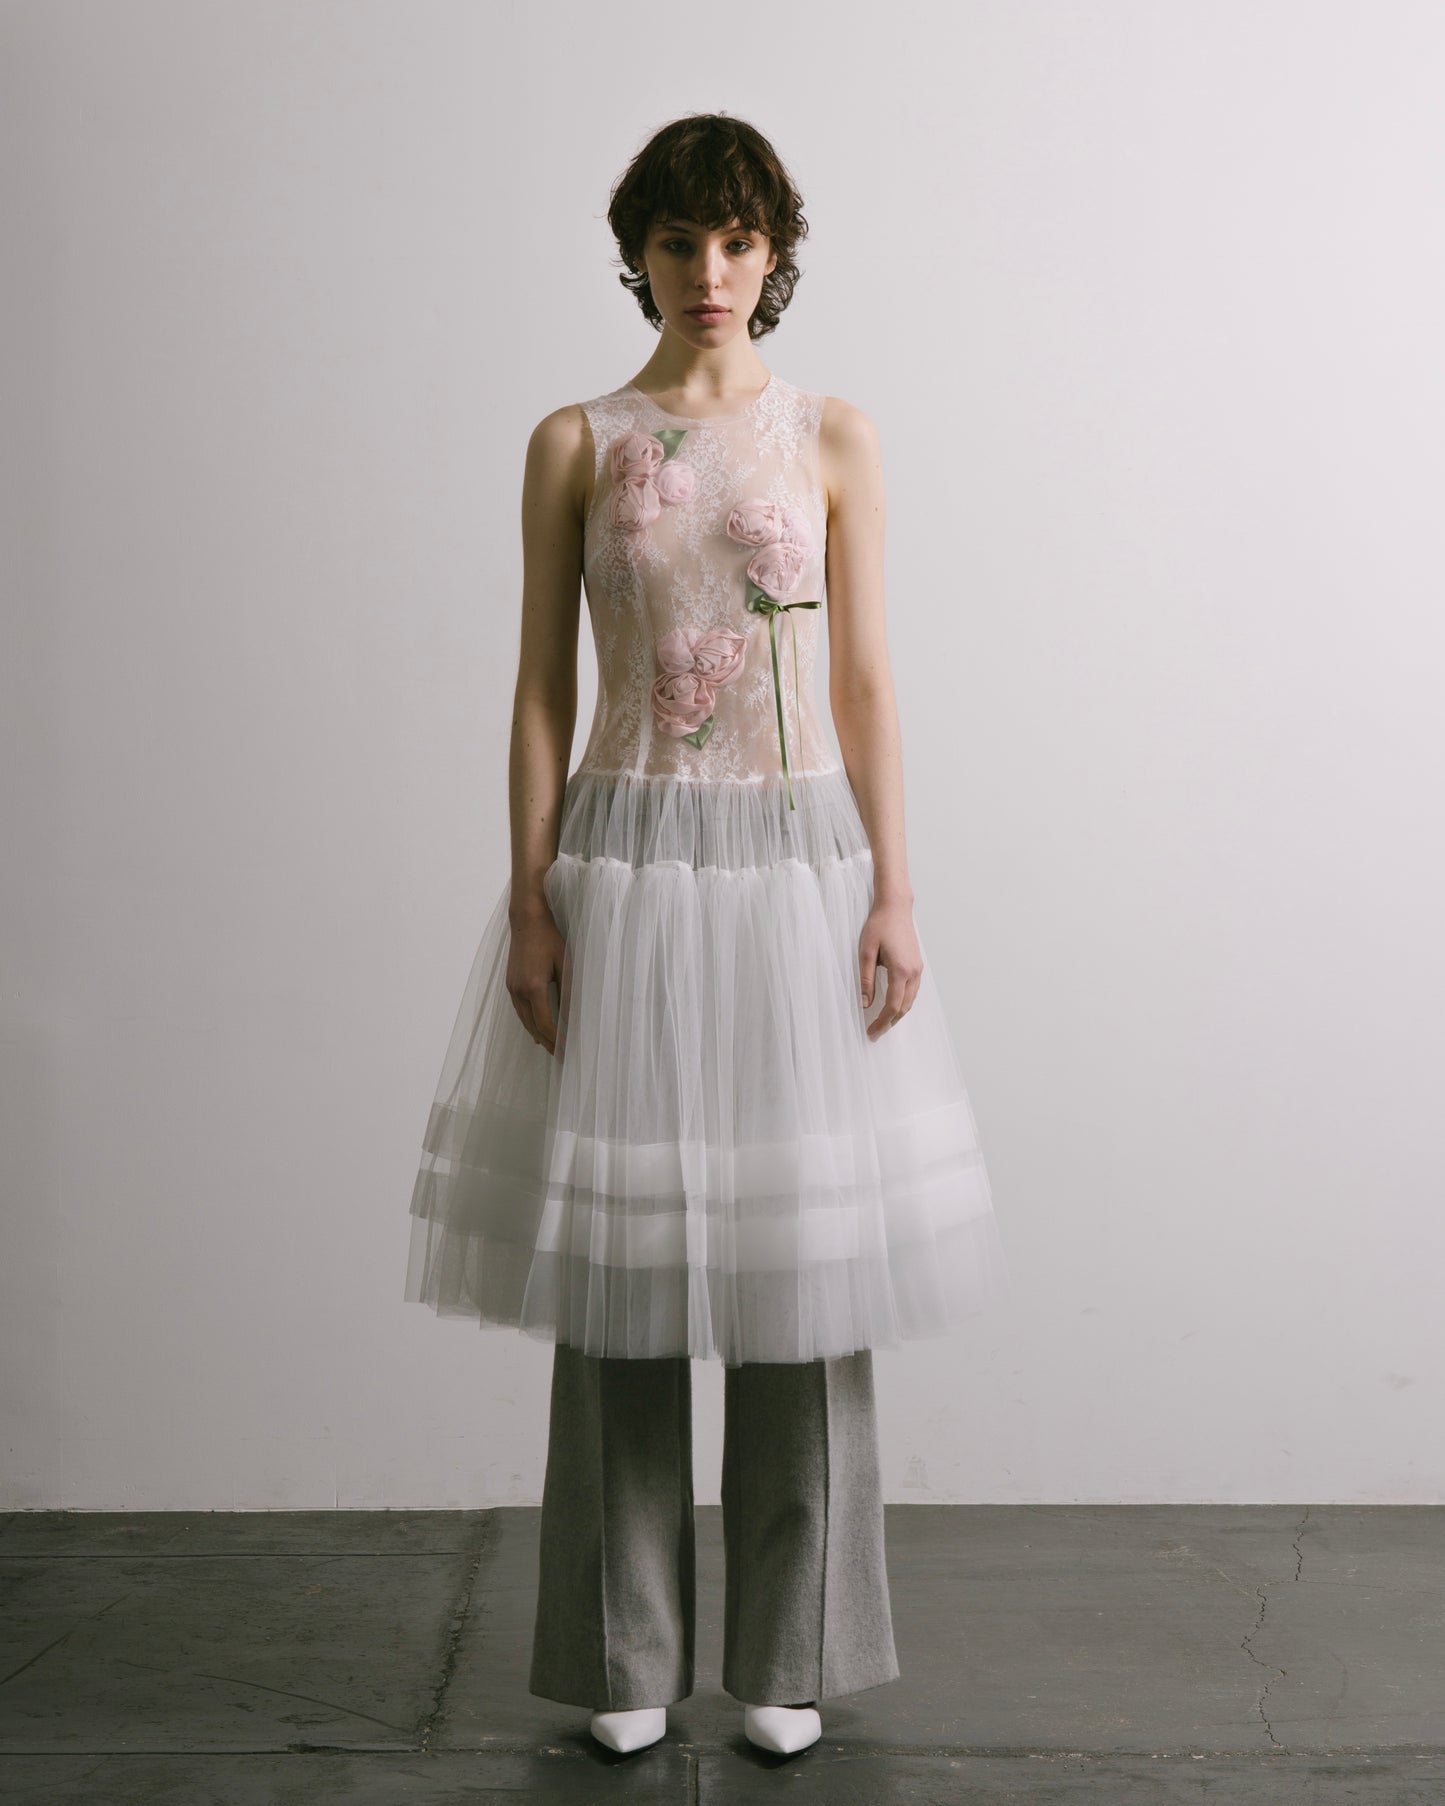 Tulle dress of “Roses in the Painting”